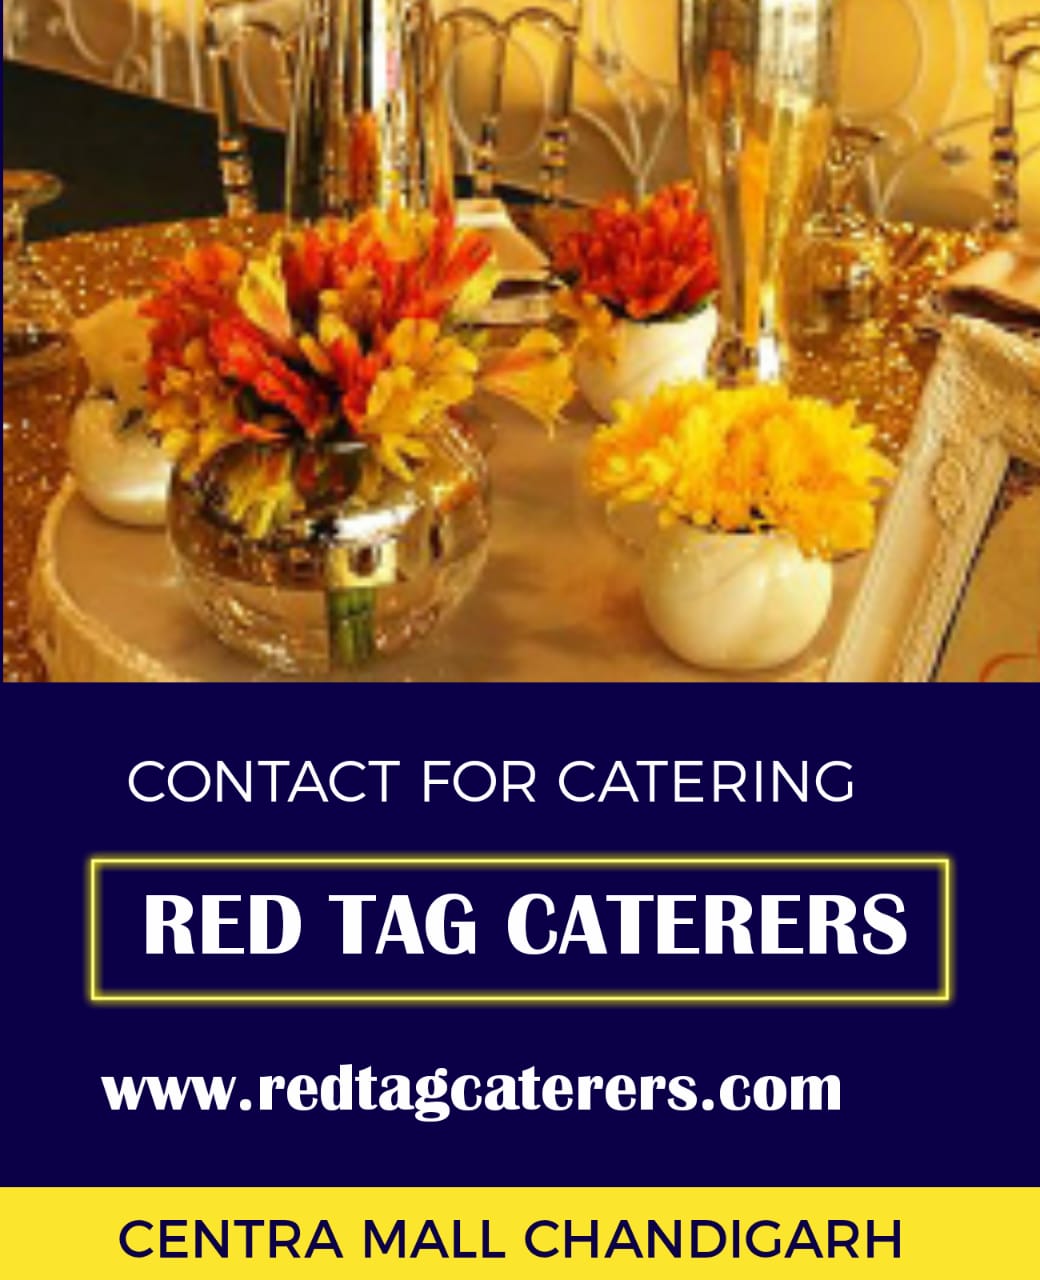 RED TAG caterers is a well-known best organization in zirakpur Mohali punjab | Red Tag Caterers | Best quality catering services in zirakpur Mohali punjab, best organization catering services in zirakpur Mohali punjab, unique catering services in zirakpur Mohali punjab,high quality catering servic - GL46437